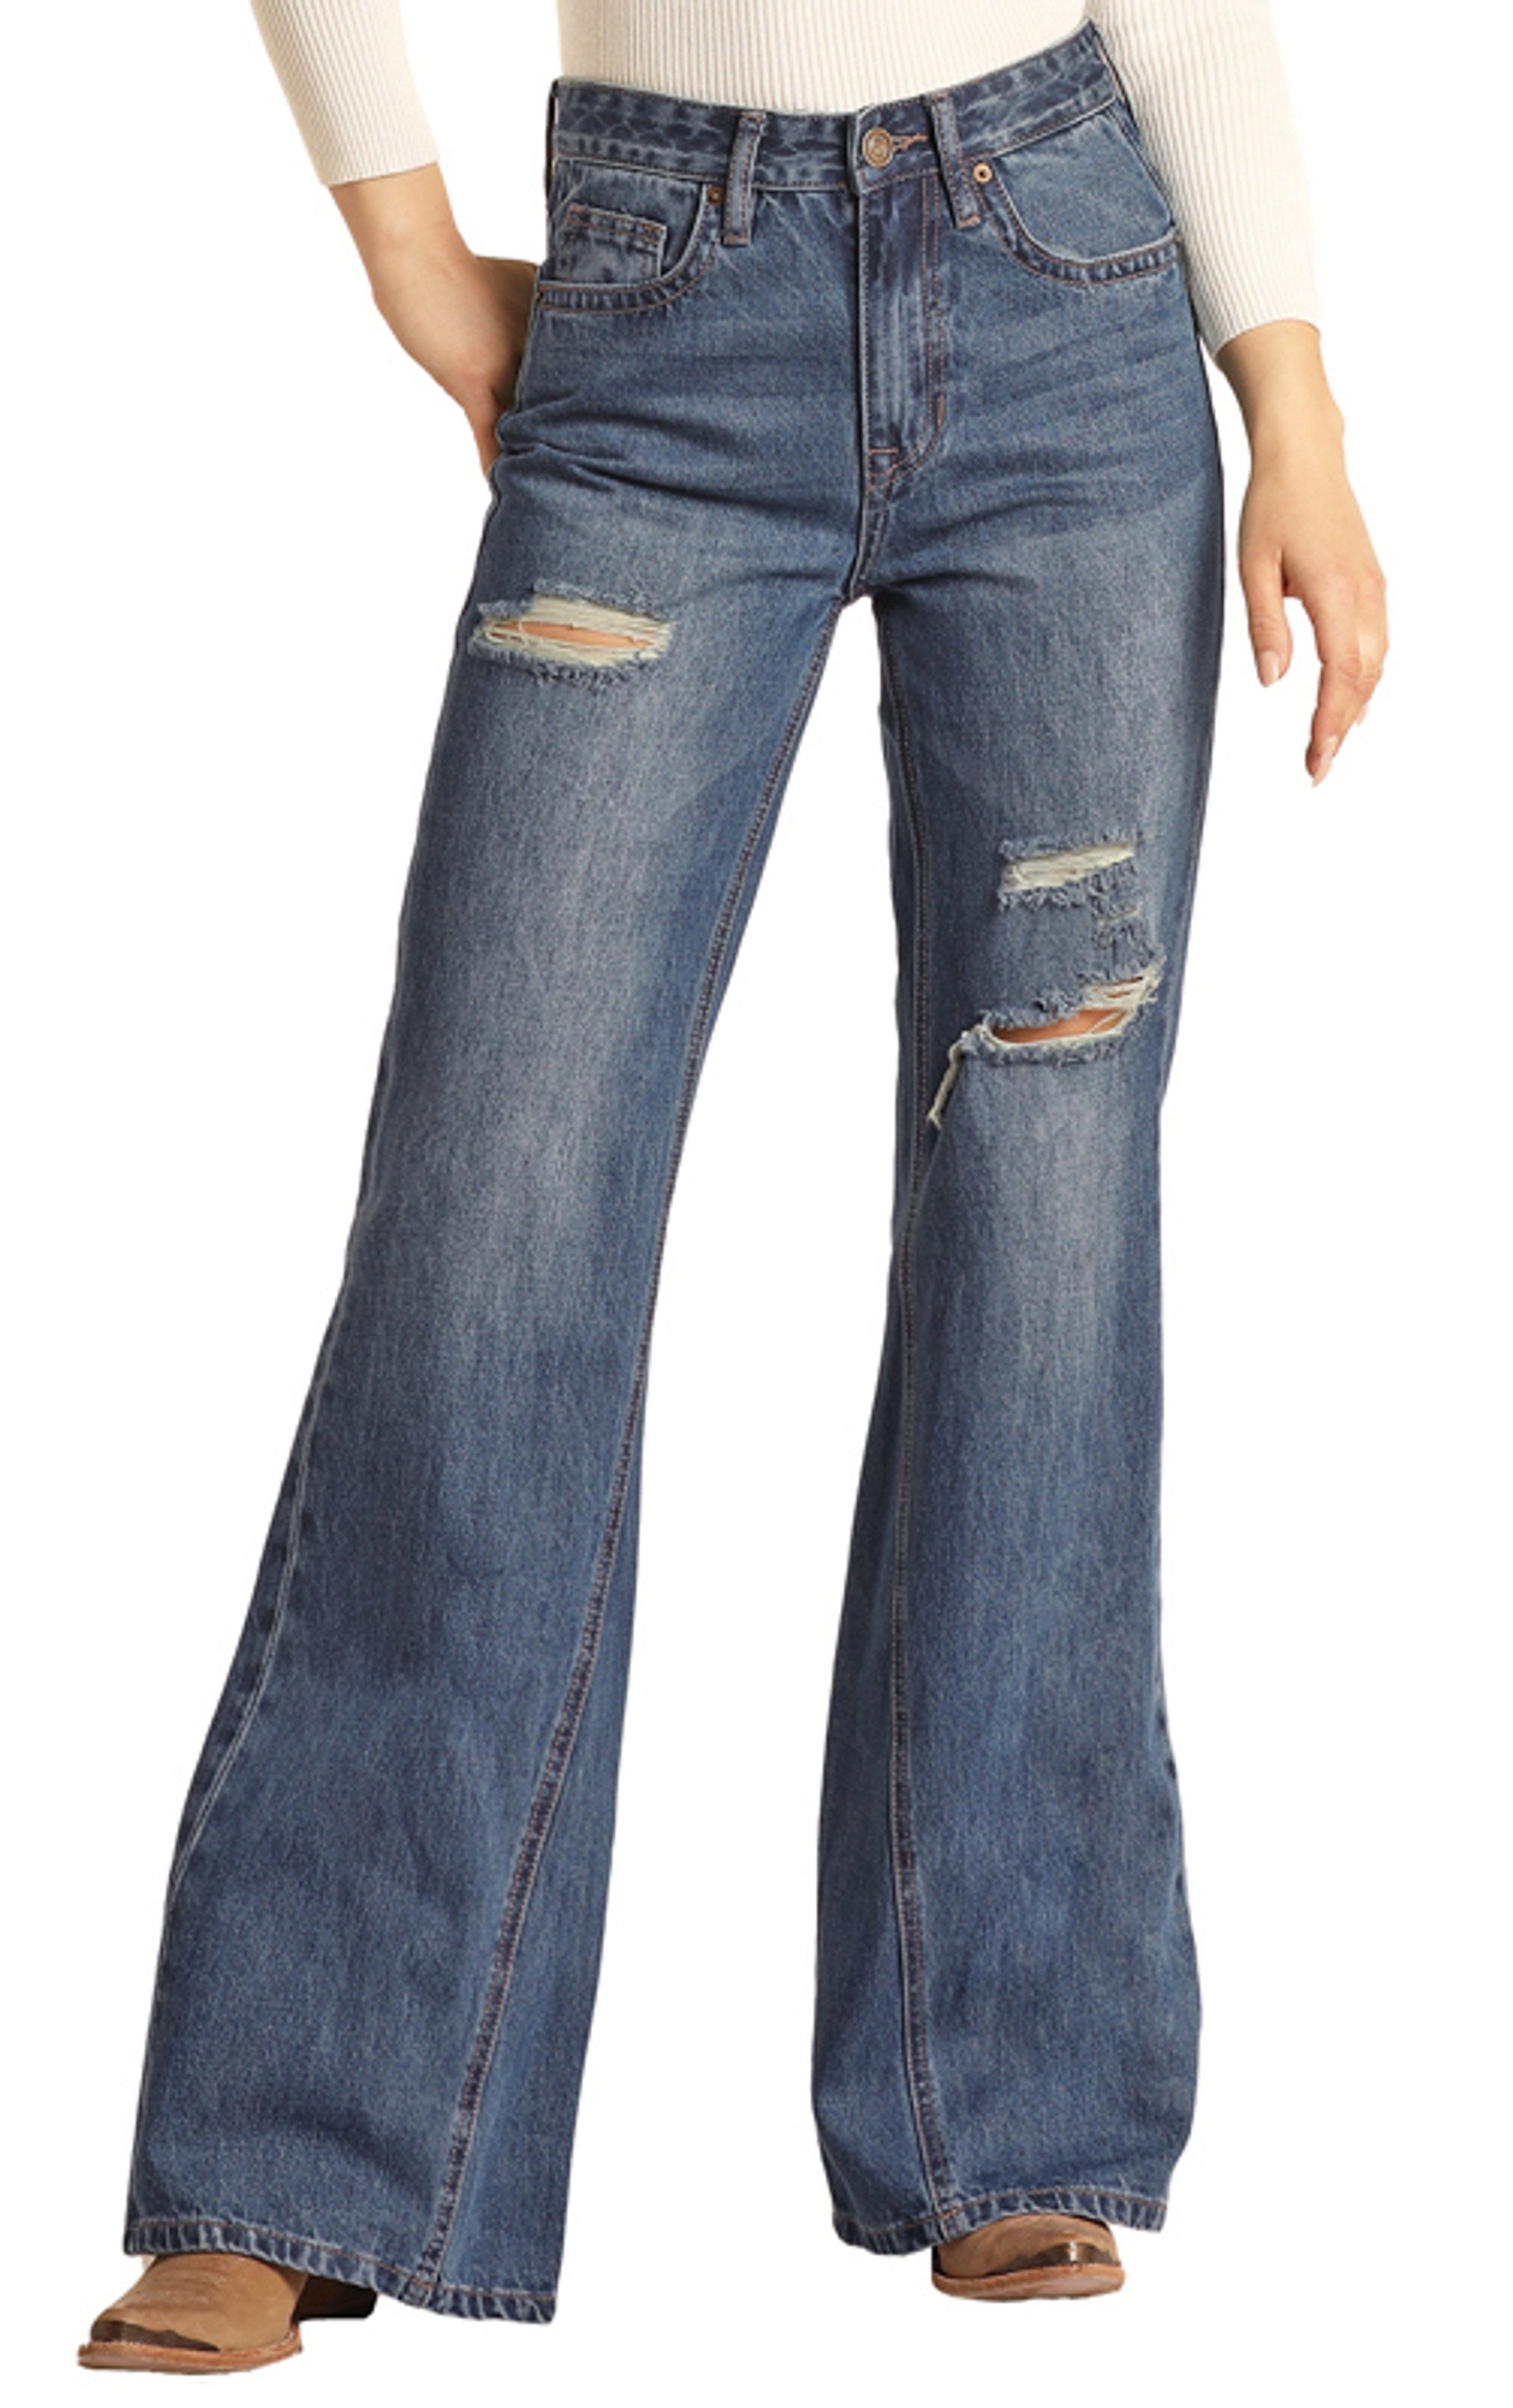 Women's High Rise Palazzo Flare Jeans | Rock and Roll Denim